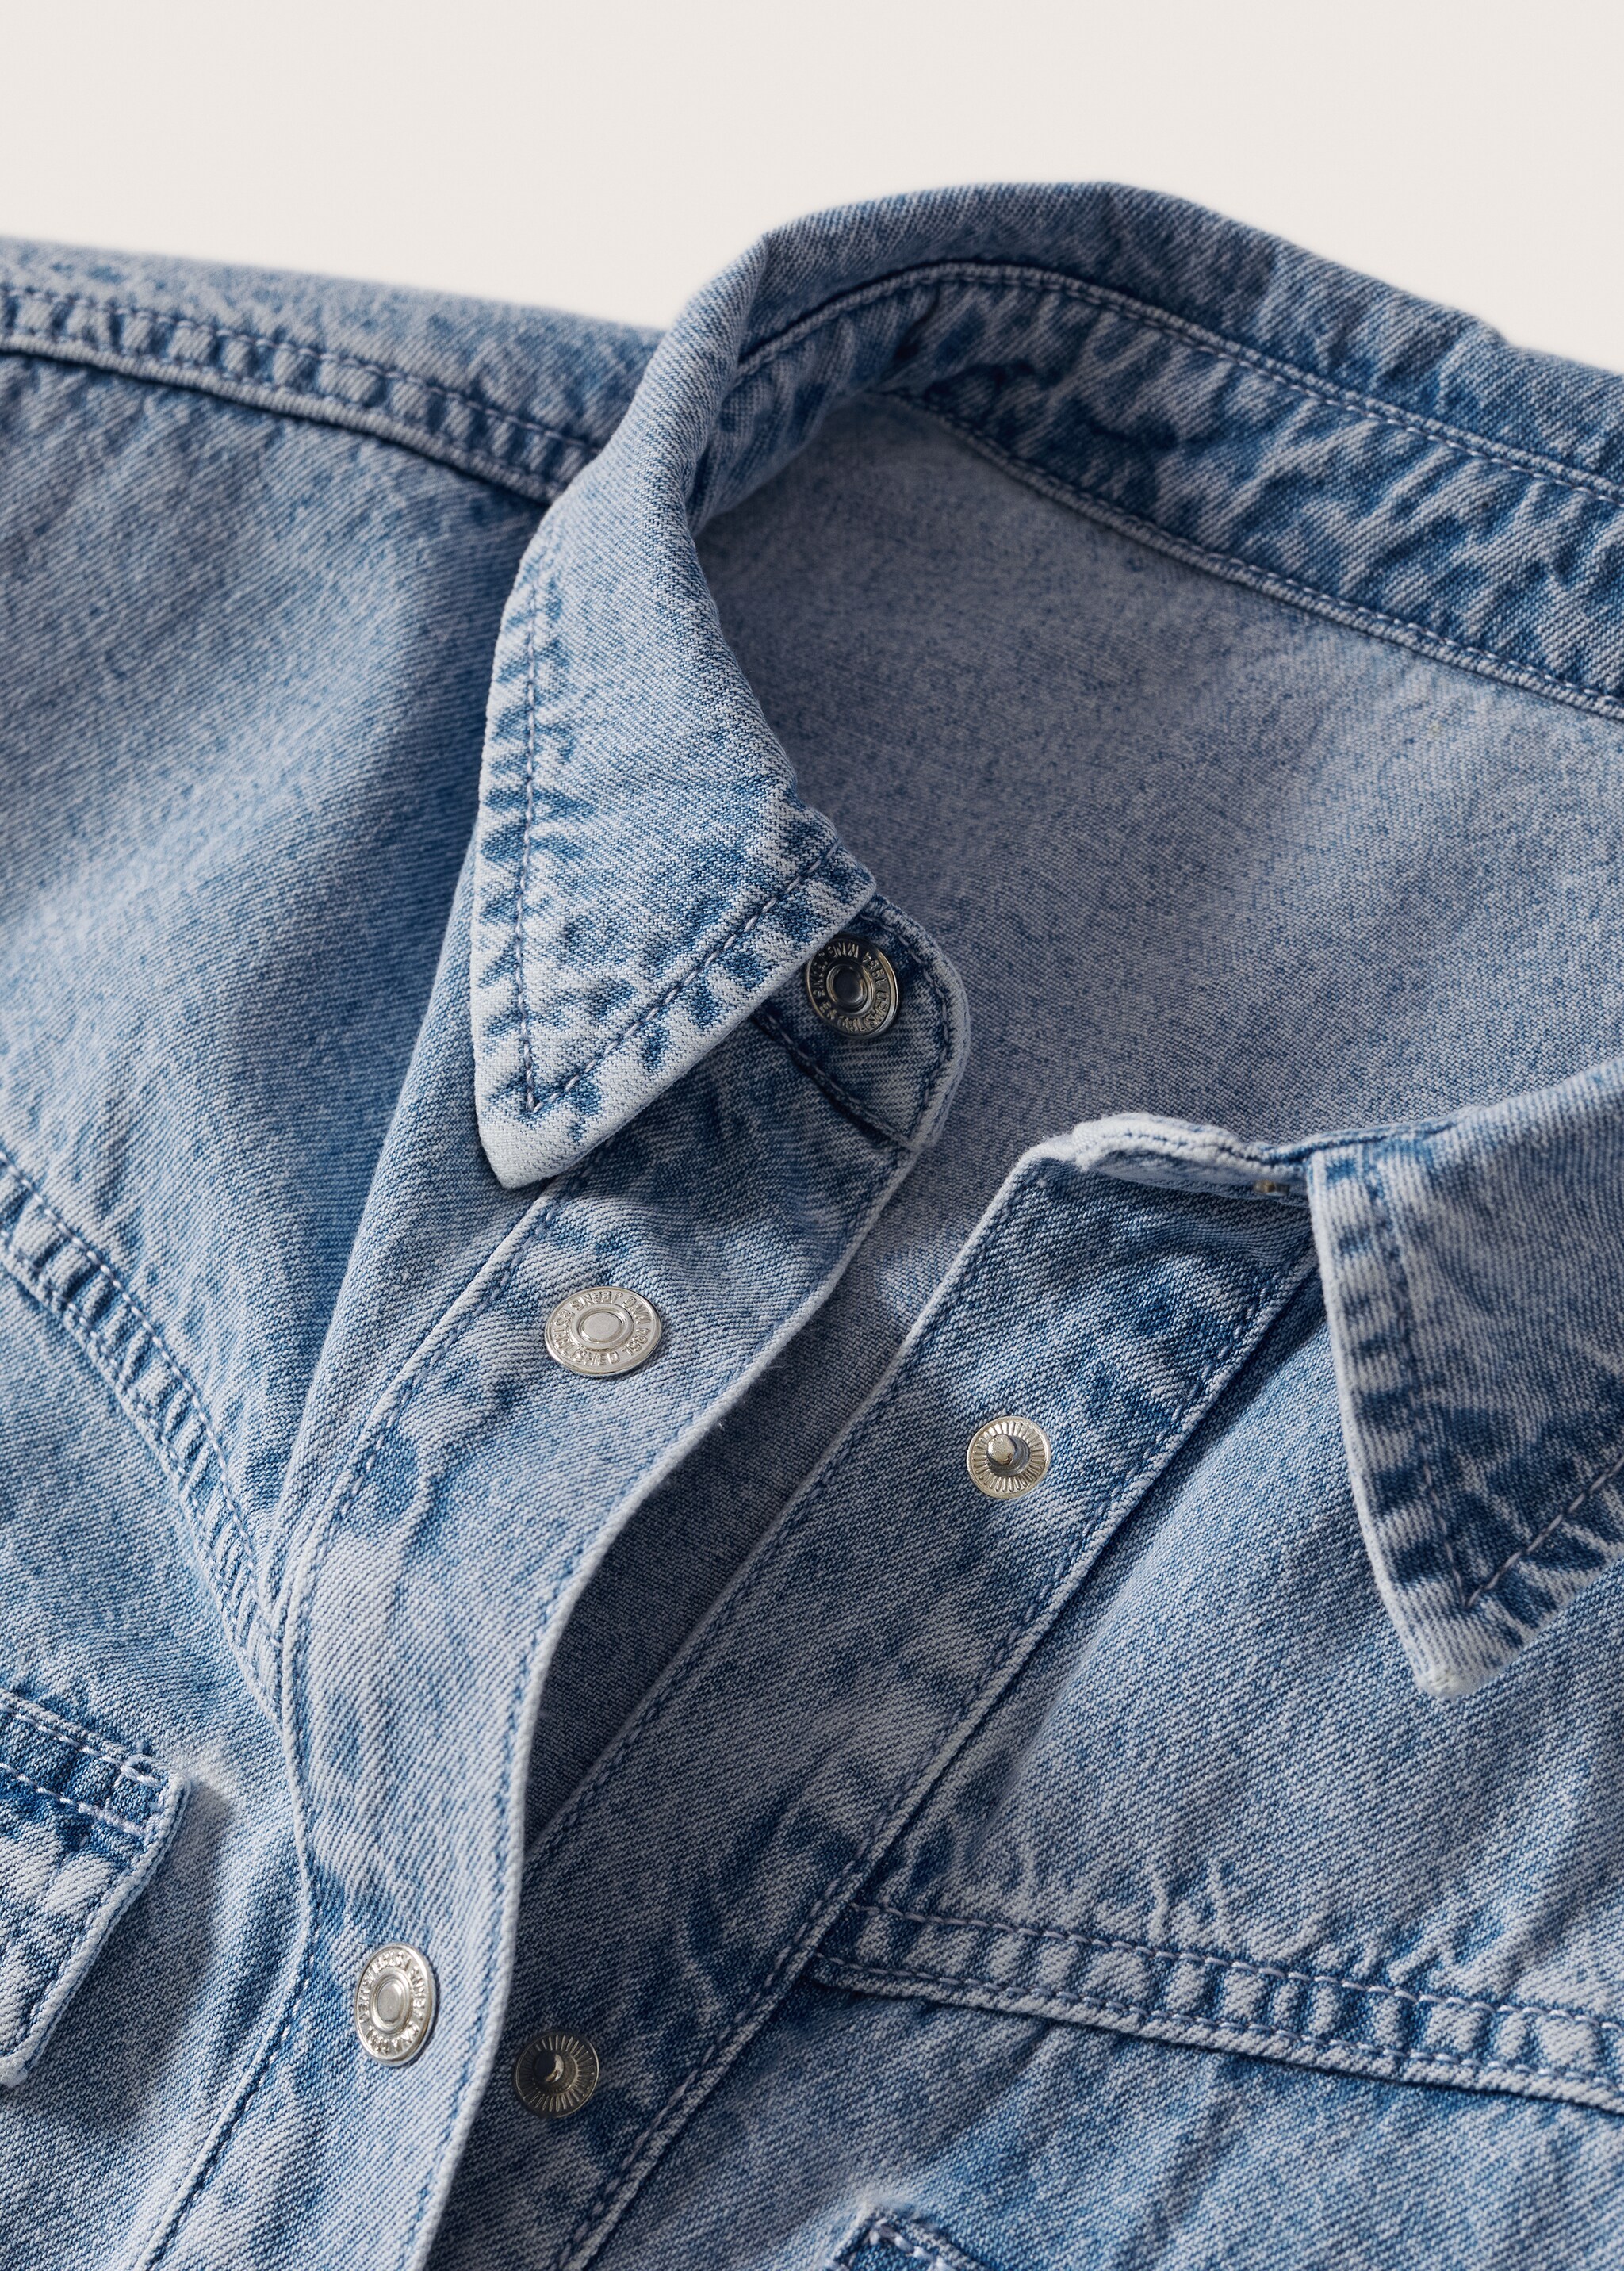 Denim shirt with shoulder pads - Details of the article 8